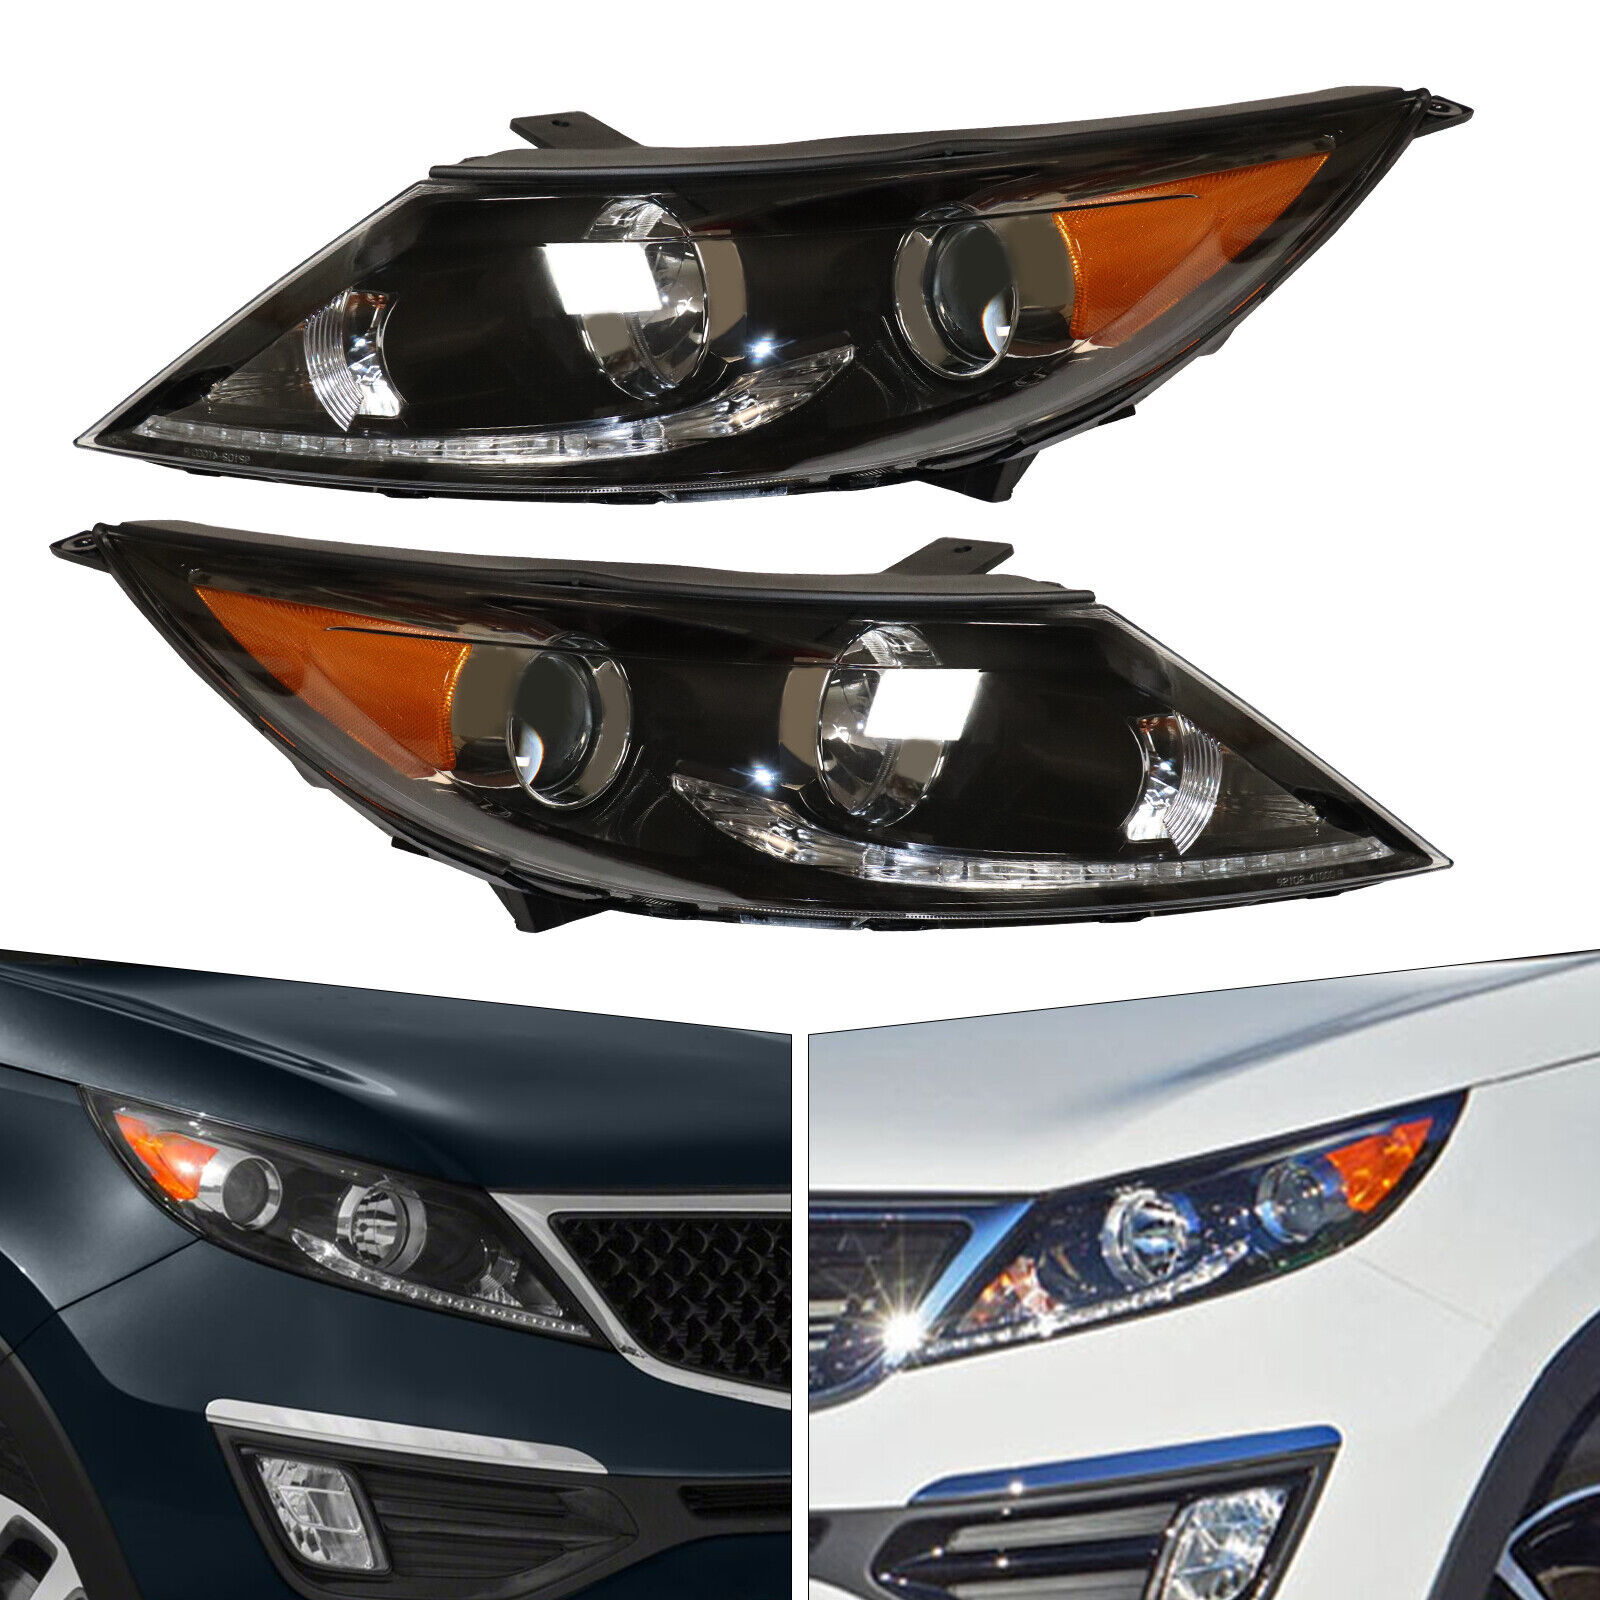 FOR KIA Sportage 2013 2014 2015 2016 Halogen Headlight Assembly W/ LED DRL Lamps